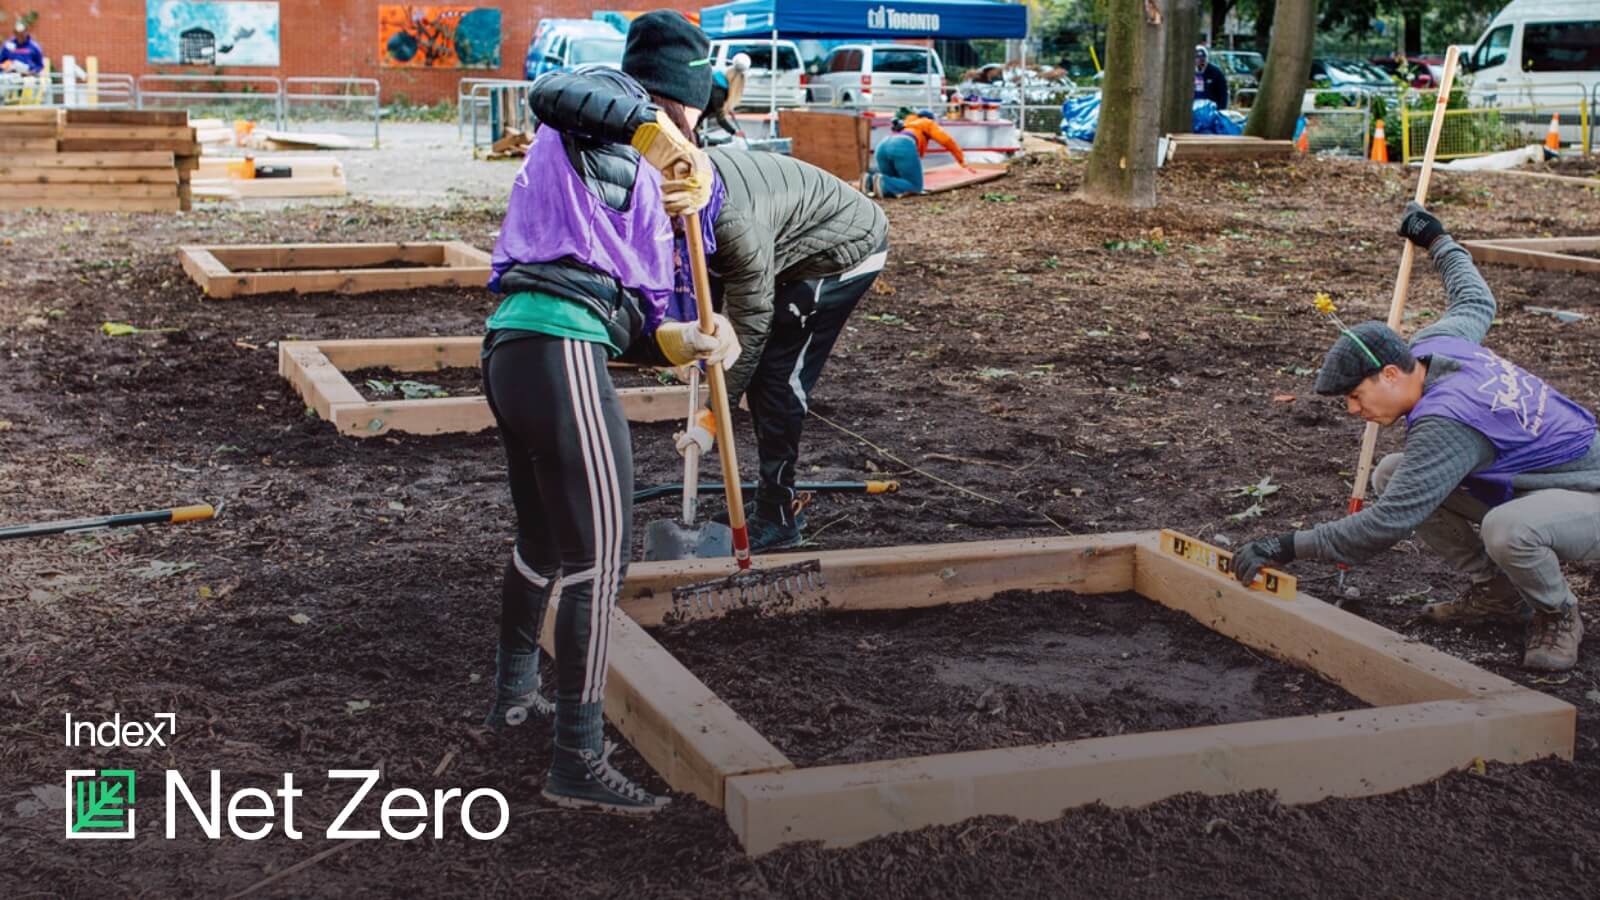 Index_net_zero_group_of_employees_volunteering_and_planting_things_careers